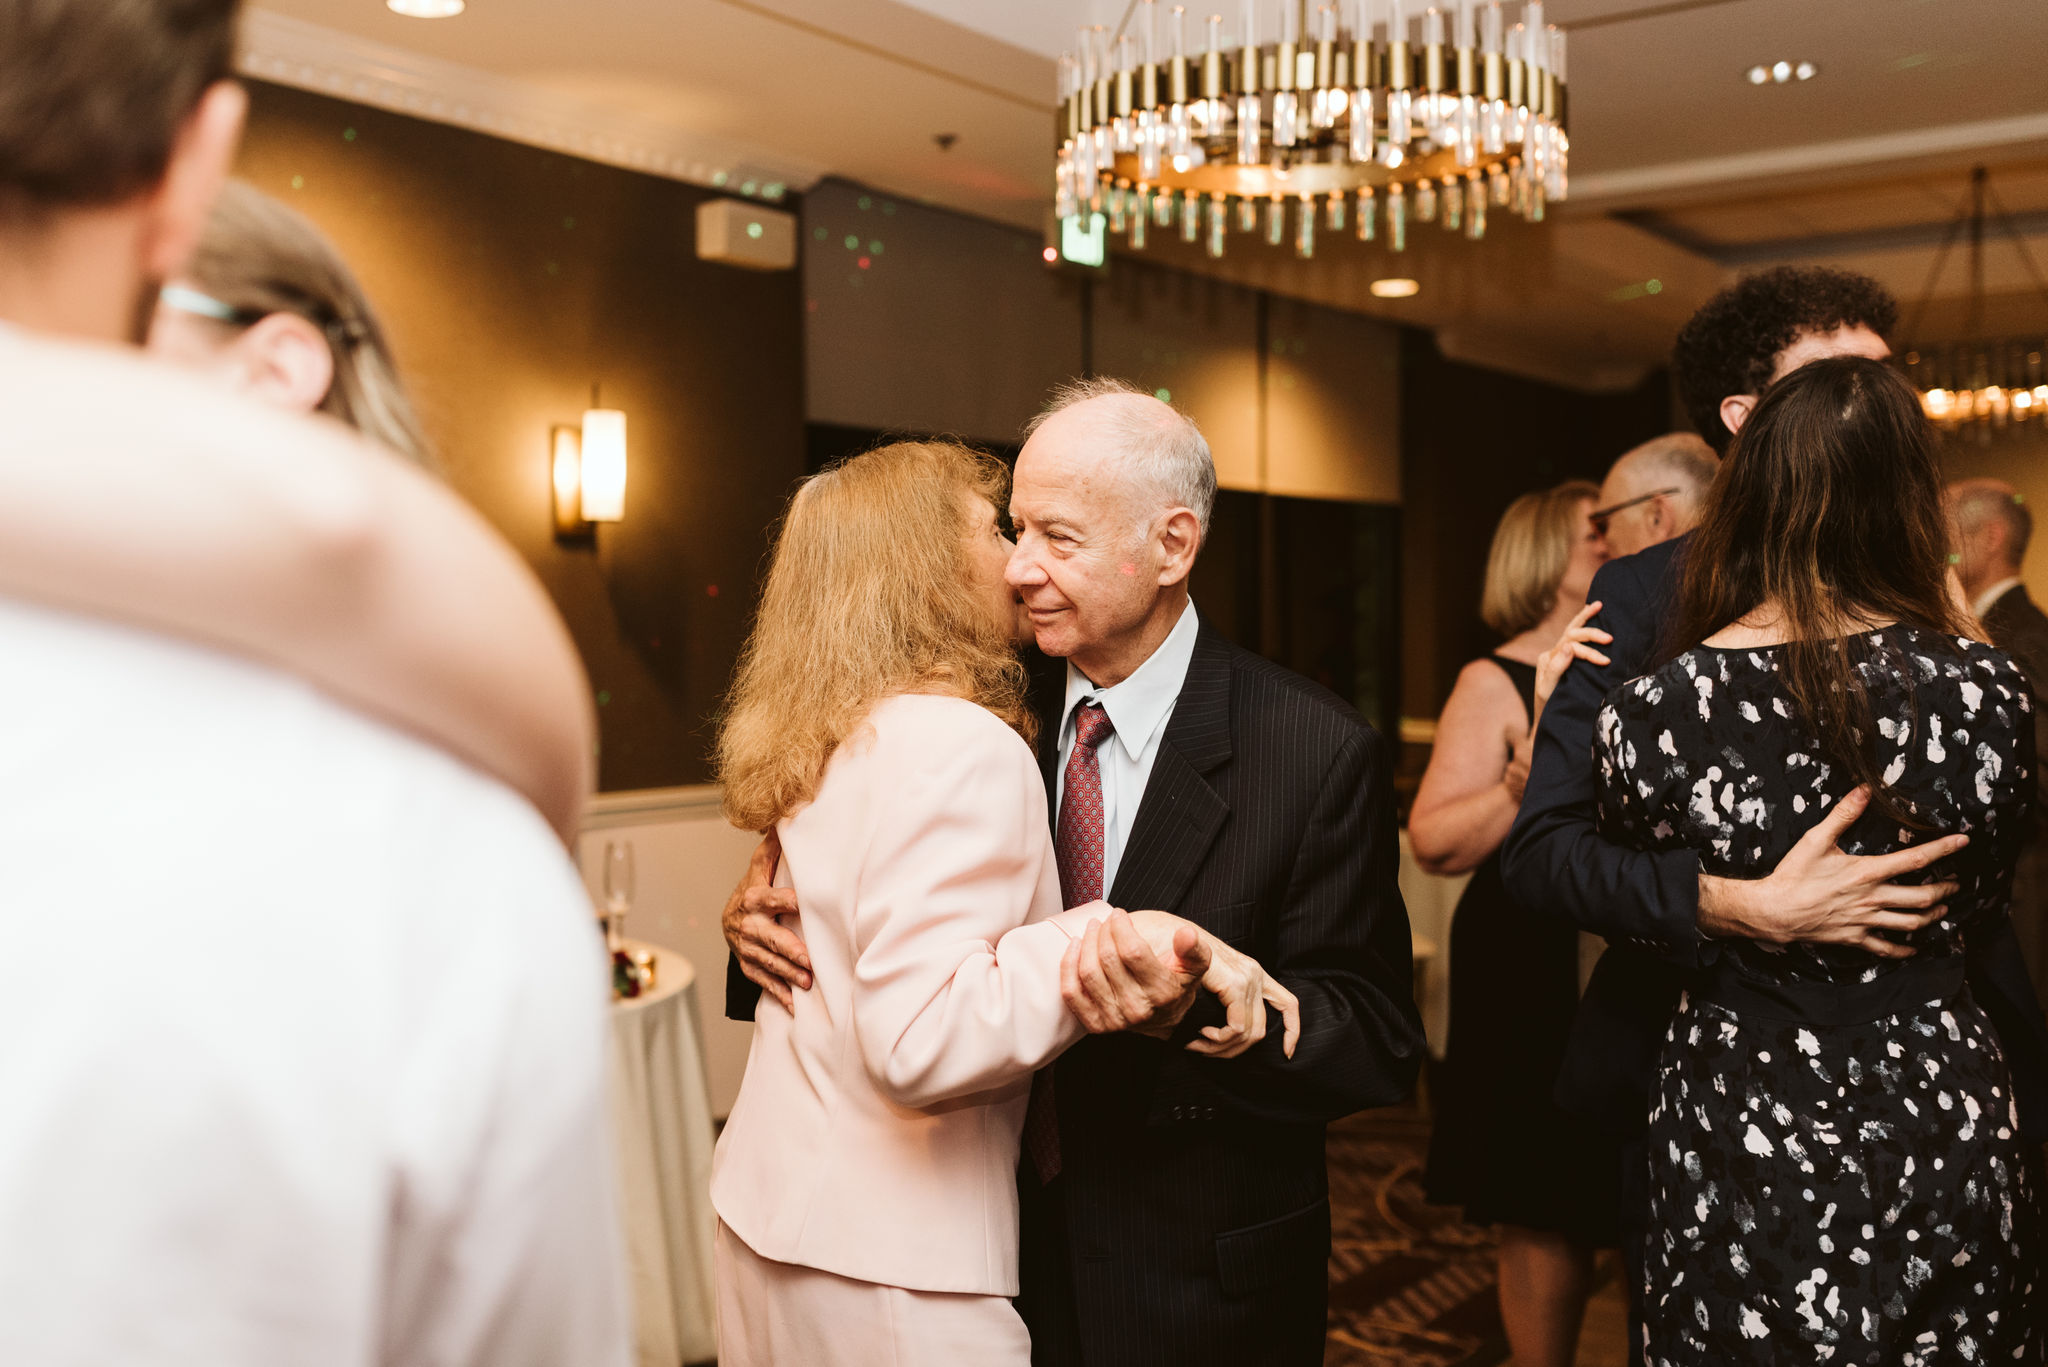  Phoenix Maryland, Baltimore Wedding Photographer, Eagle’s Nest Country Club, Classic, Romantic, Older Couple Sweetly Dancing at Reception 